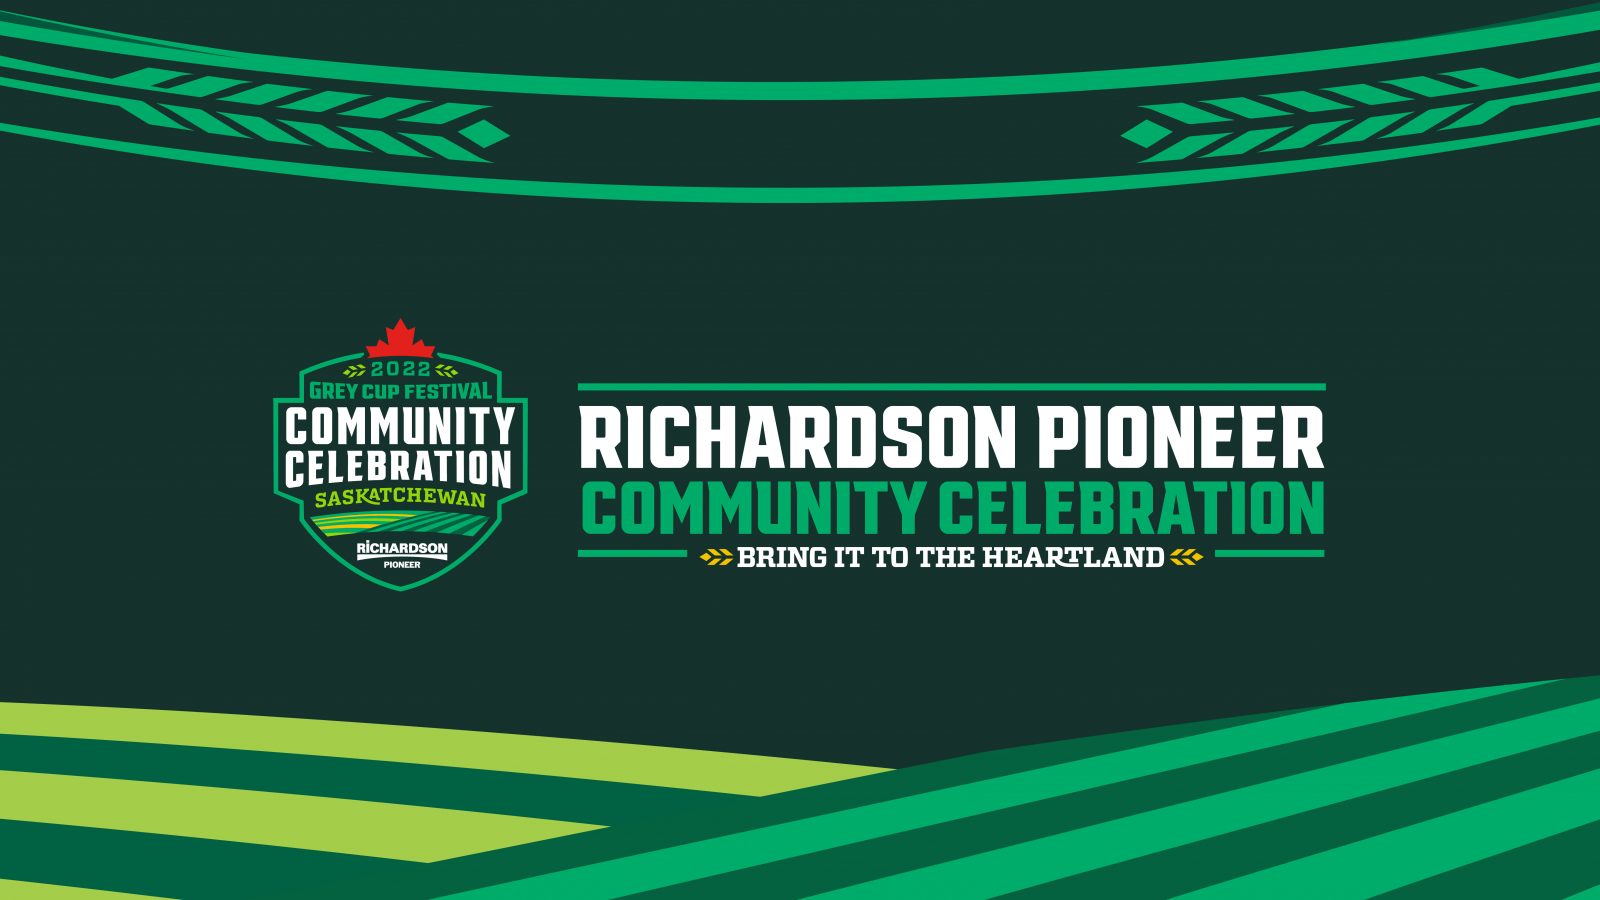 Featured image for “Richardson Pioneer Rider Nation Community Celebration Contest Winners Announced”